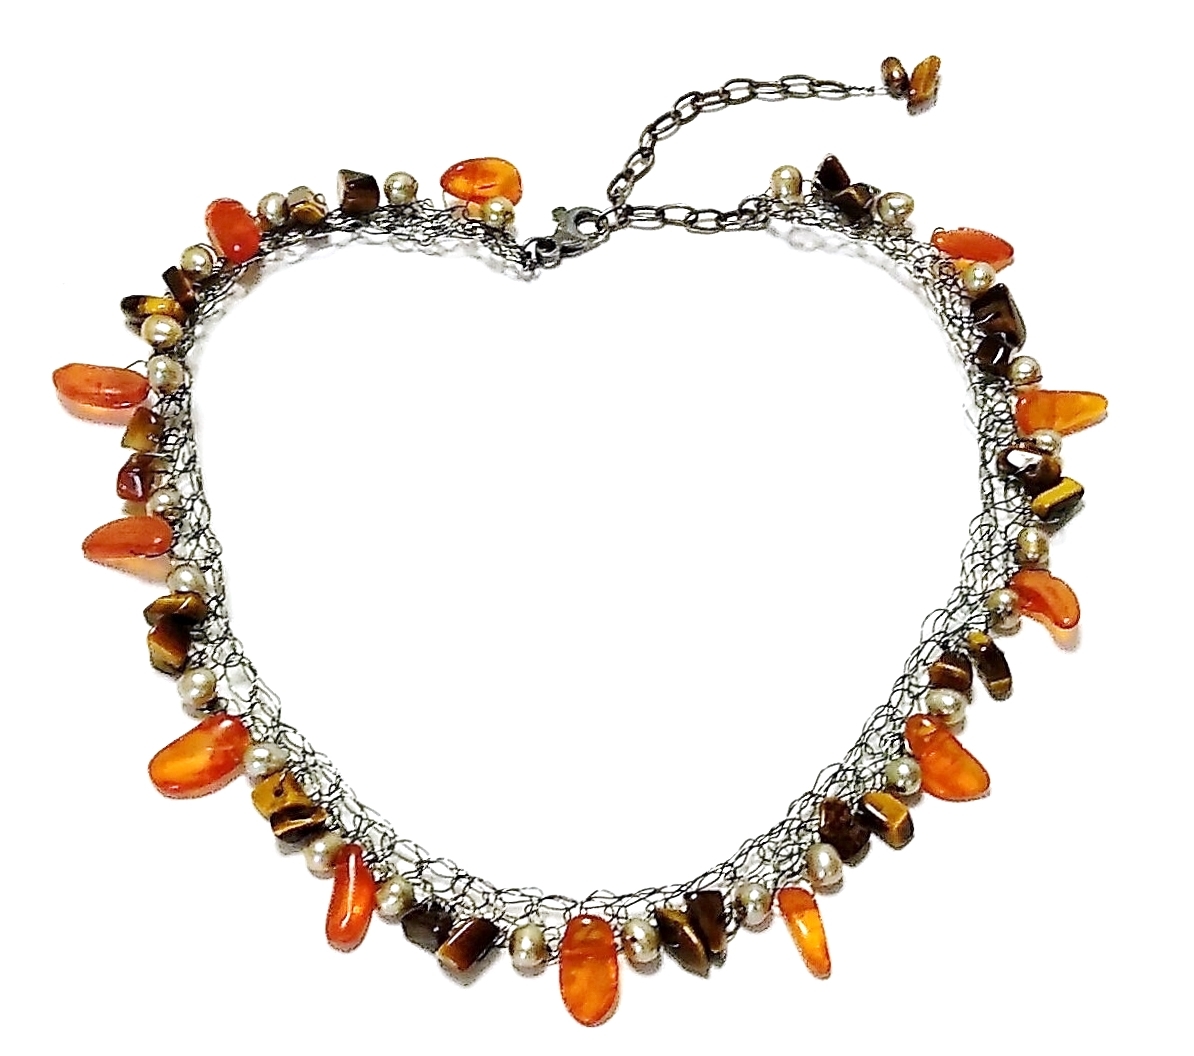 ★Handmade★One of a kind★Amber and tiger eye sterling silver braided necklace, necklace, pendant, Colored Stones, amber, amber